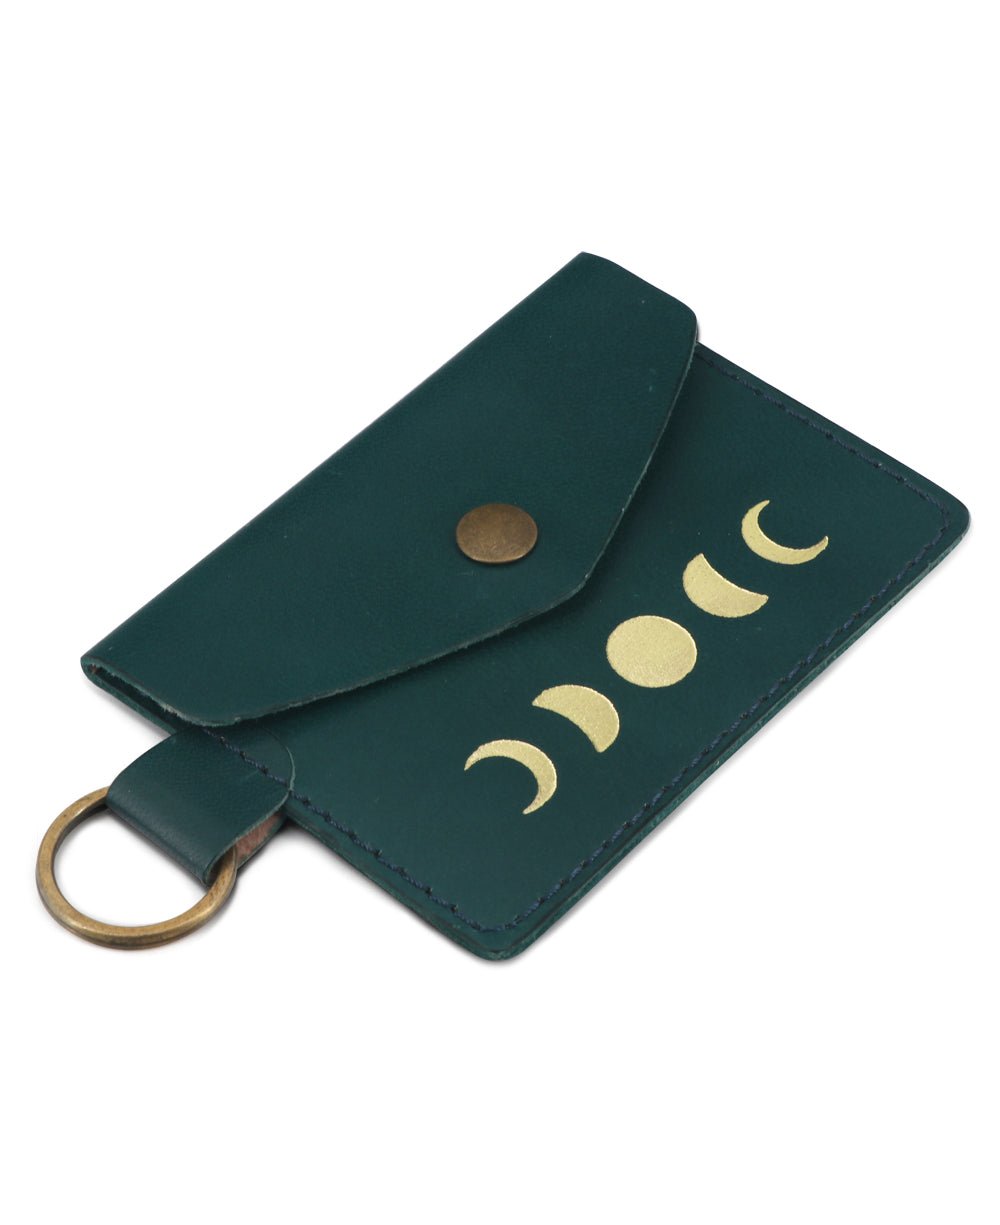 Moon Phase Leather Key Ring With Card Holder - Keychains